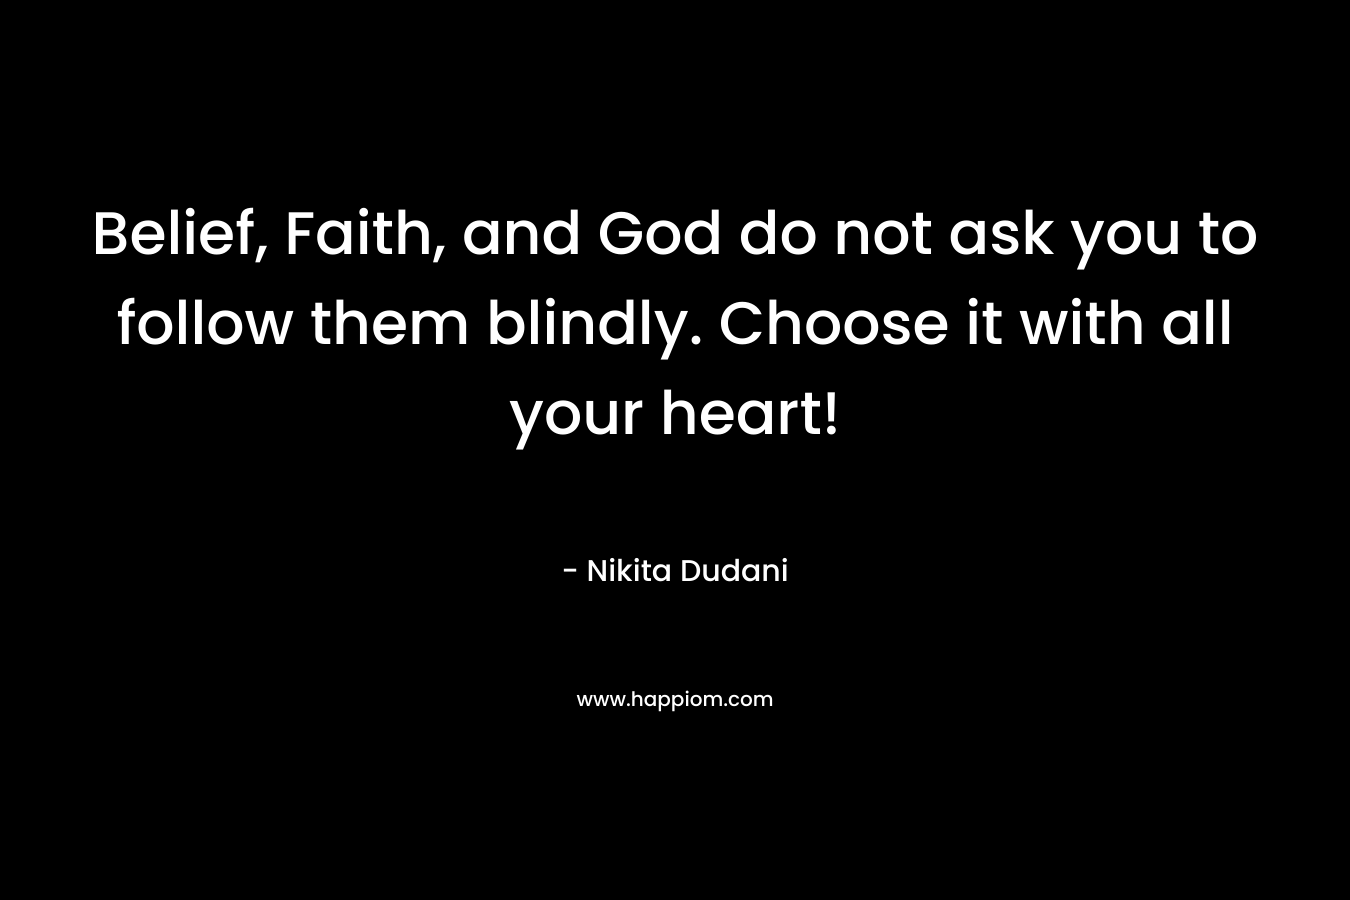 Belief, Faith, and God do not ask you to follow them blindly. Choose it with all your heart!